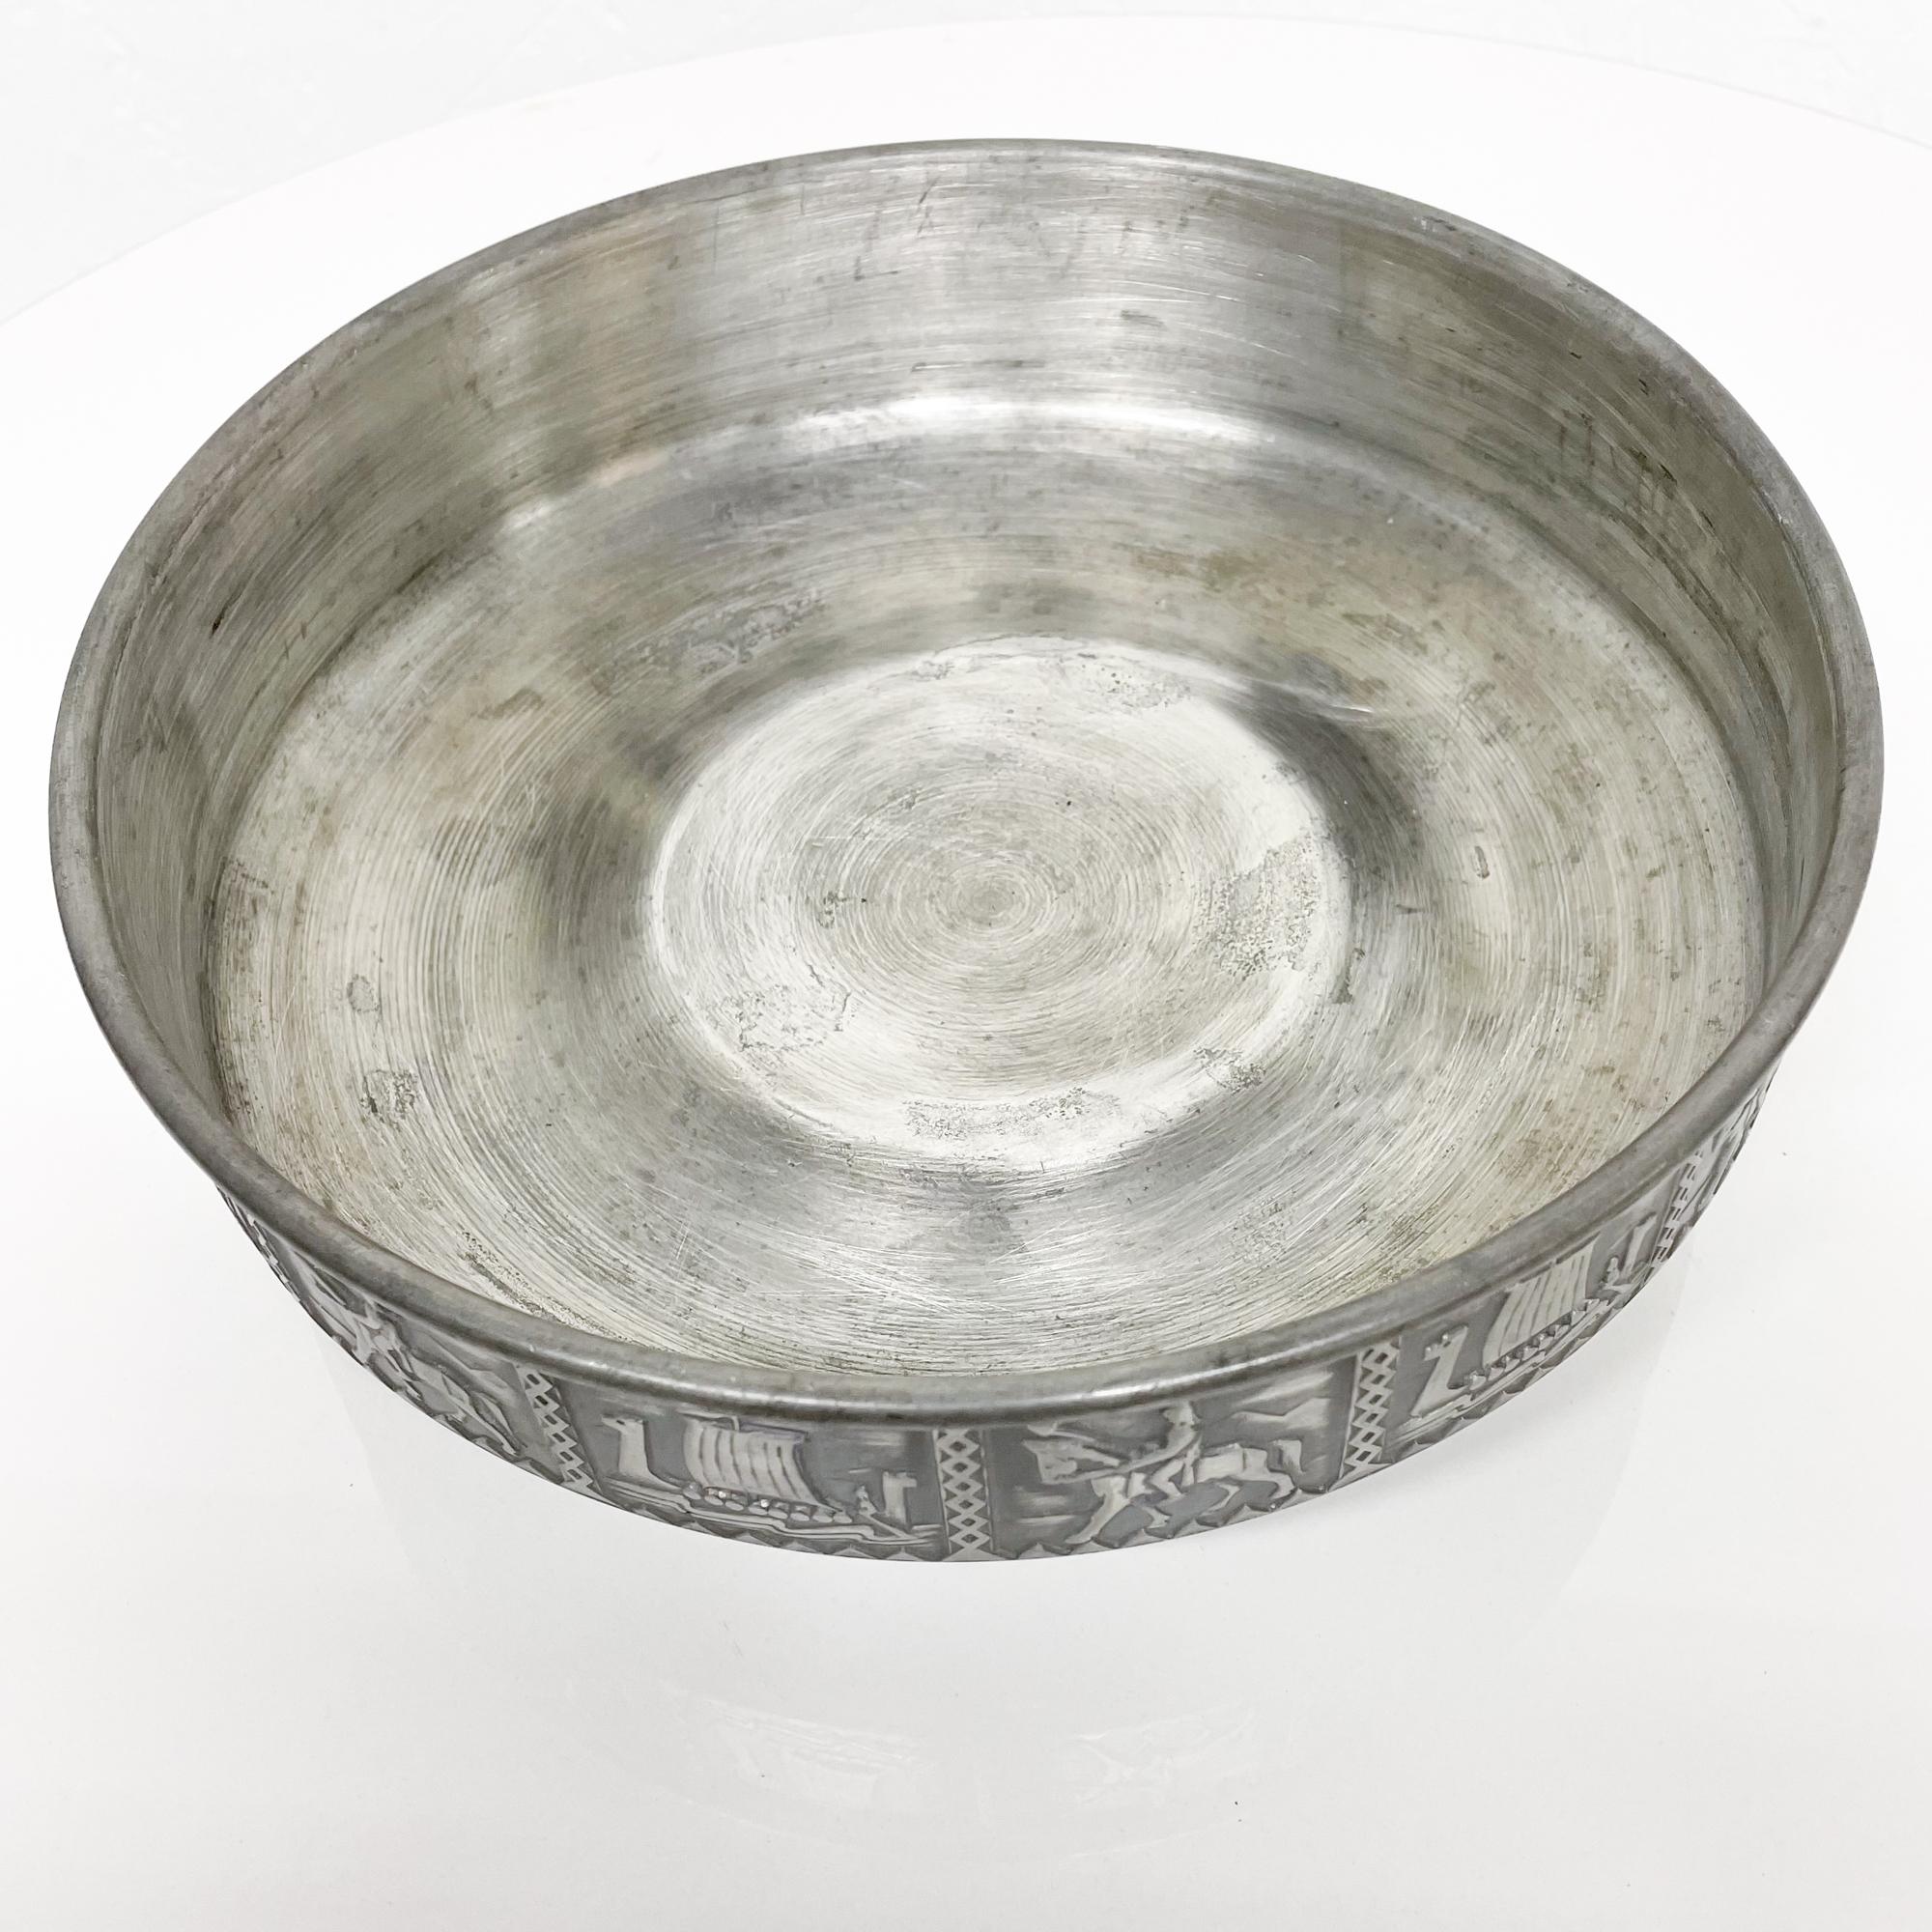 Norwegian Viking Tinn Pewter Decorative Footed Bowl by Norr NORSK BJ H